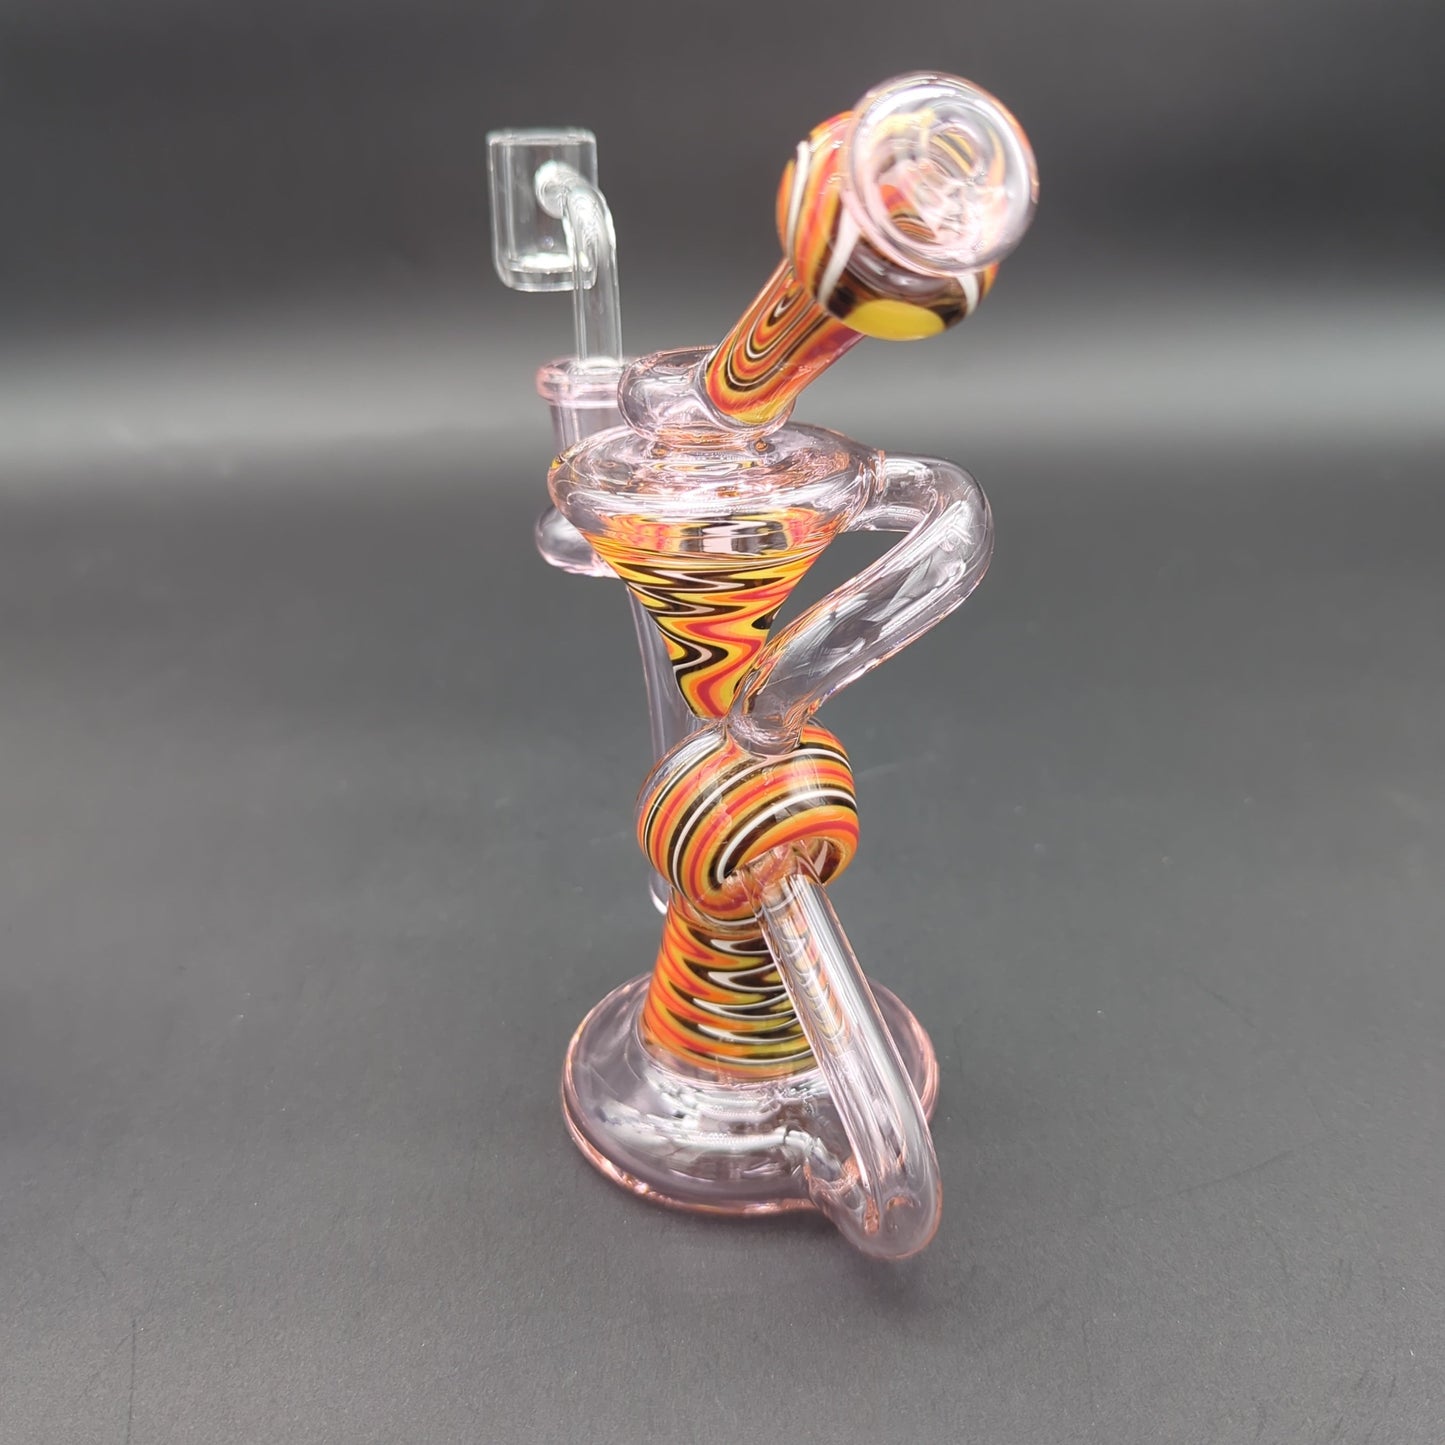 Worked Full Color Recycler Rig